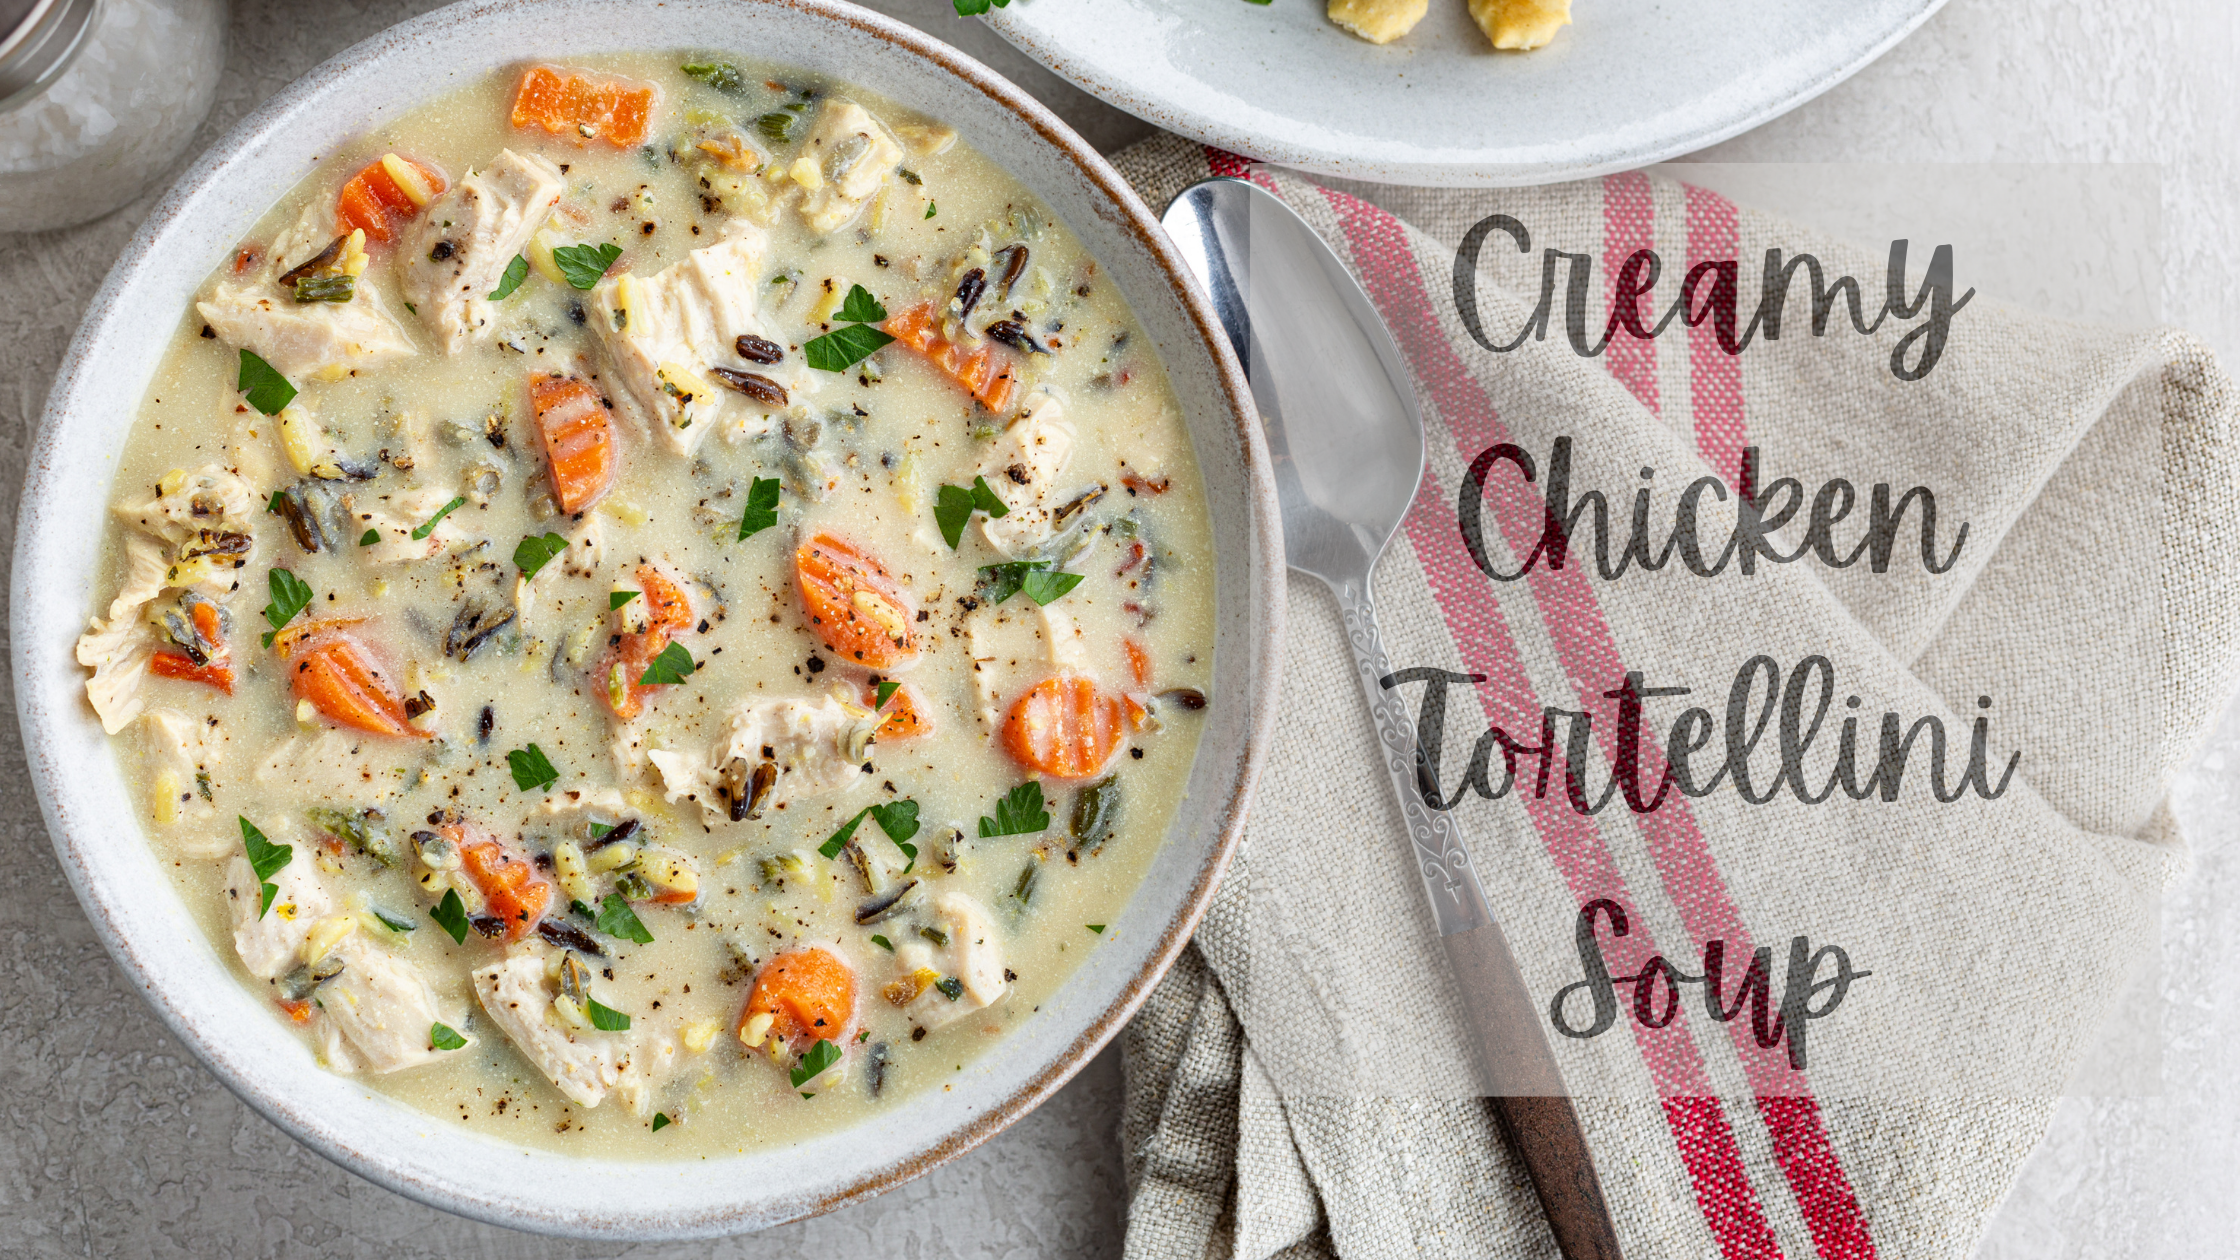 How to Make Creamy Chicken Tortellini Soup – A simple, easy and delicious recipe